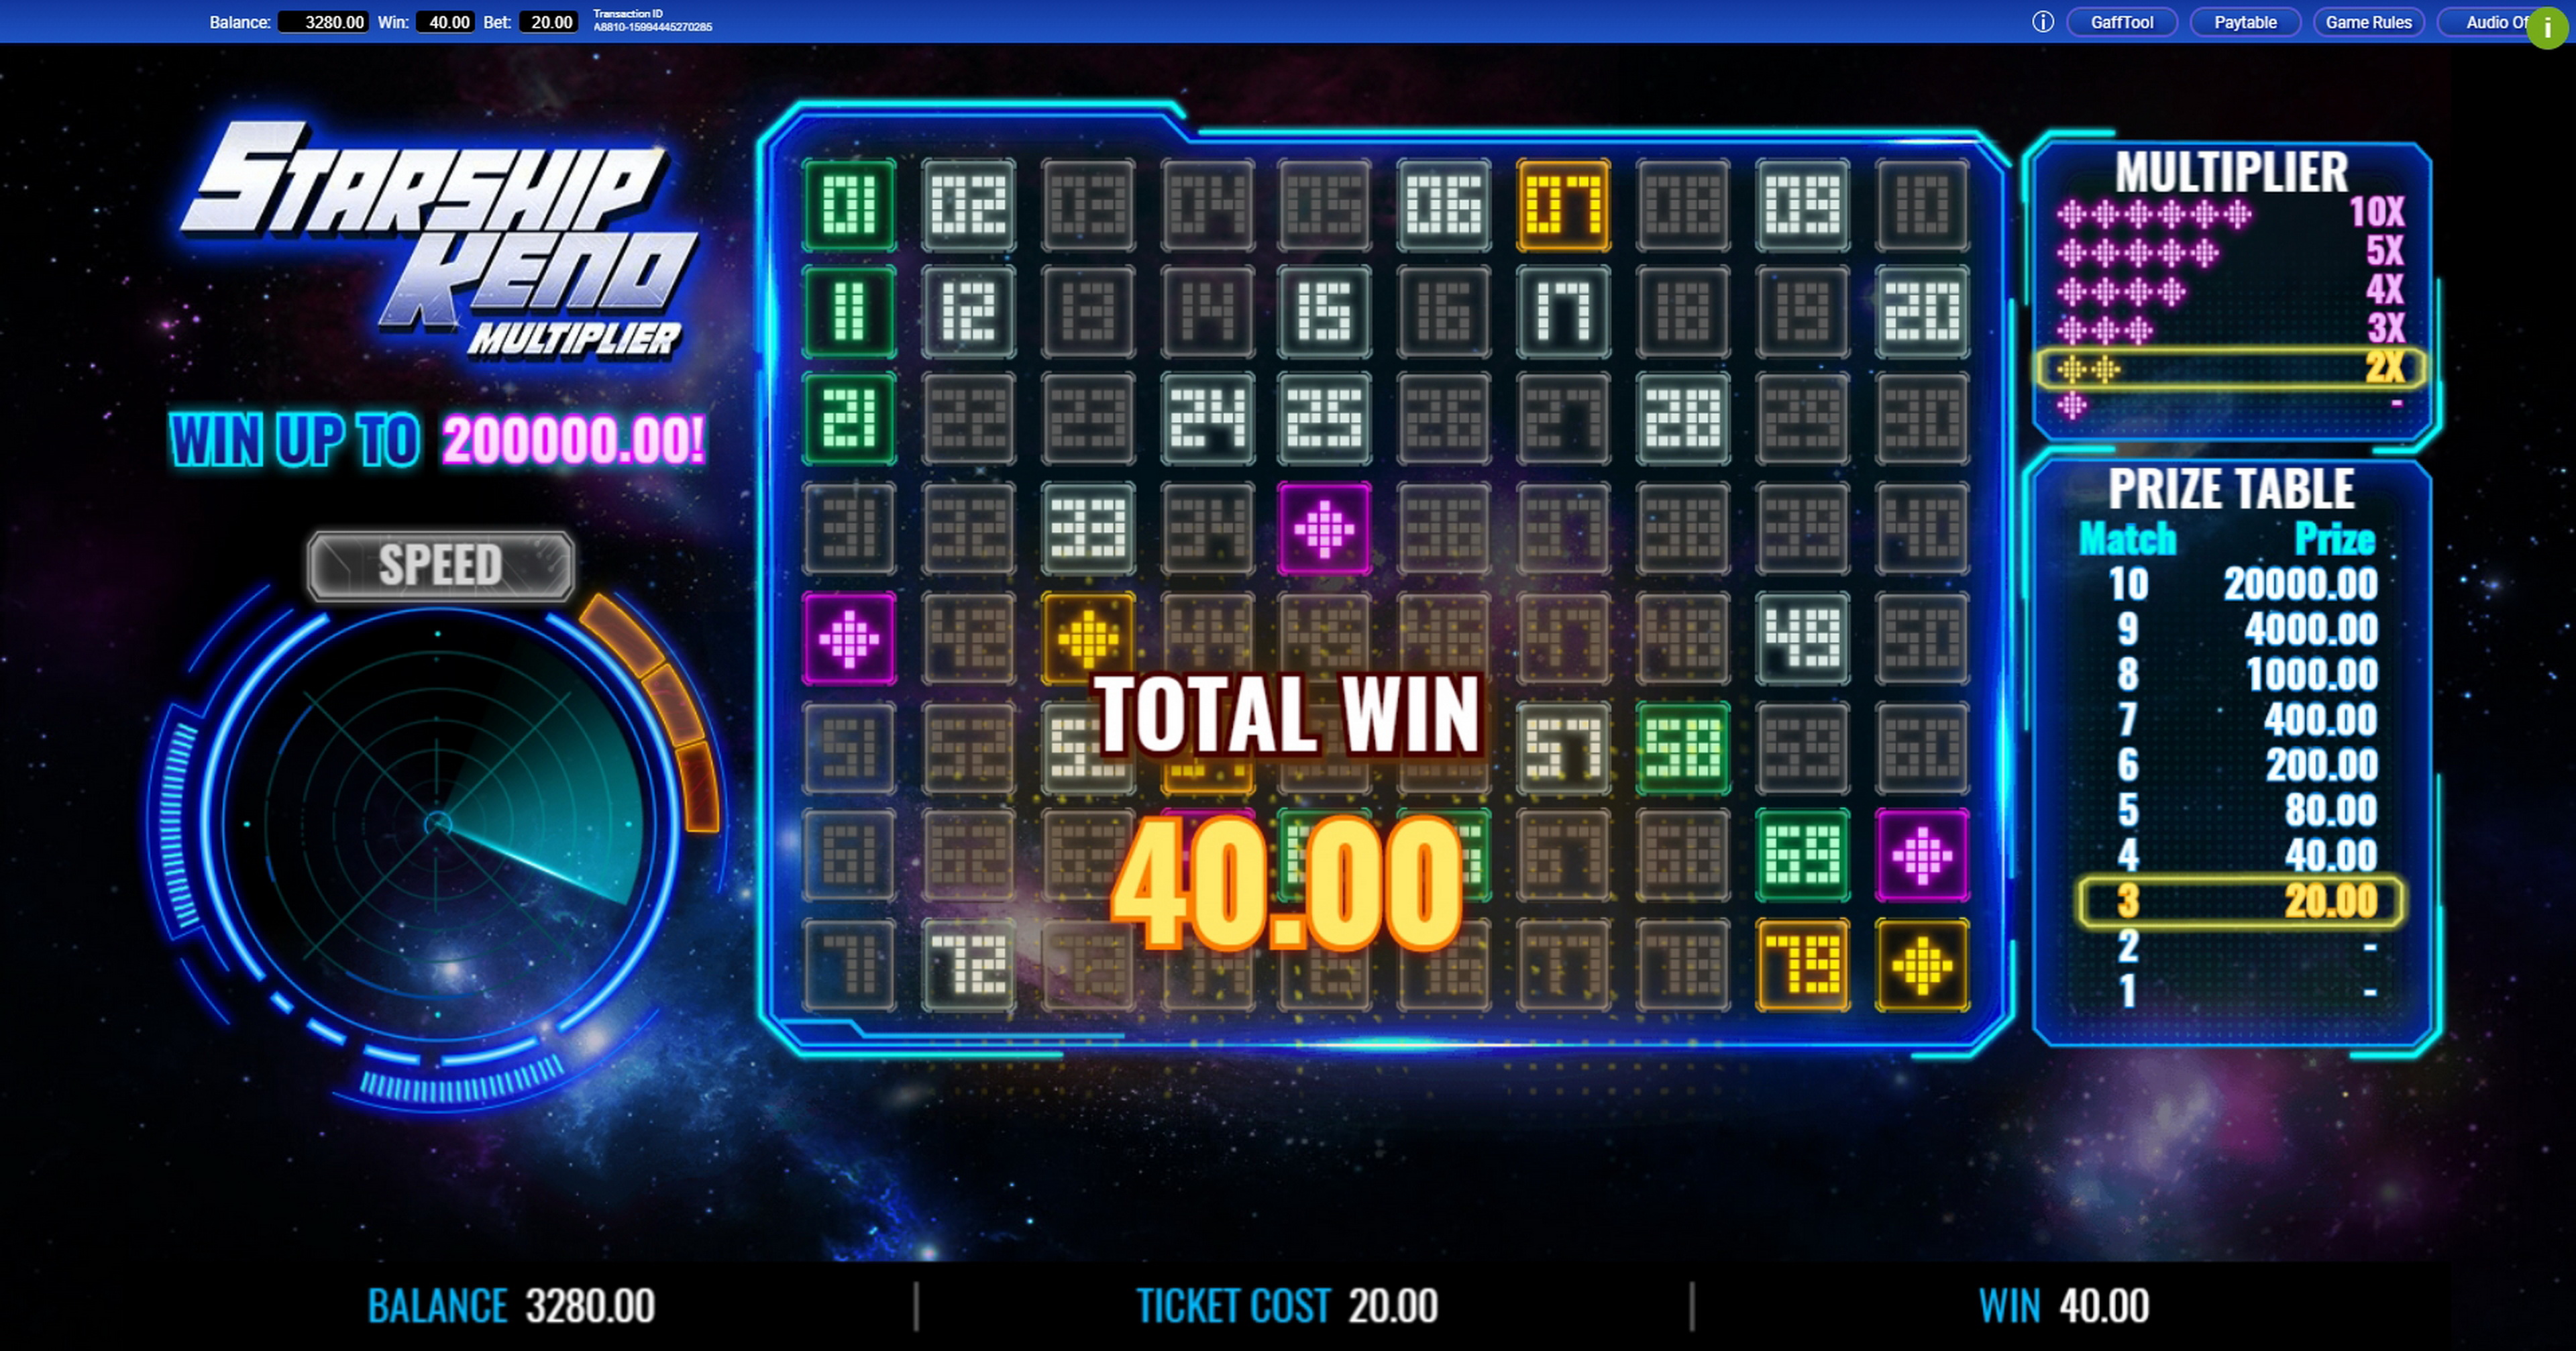 Win Money in Starship Keno Multiplier Free Slot Game by IGT